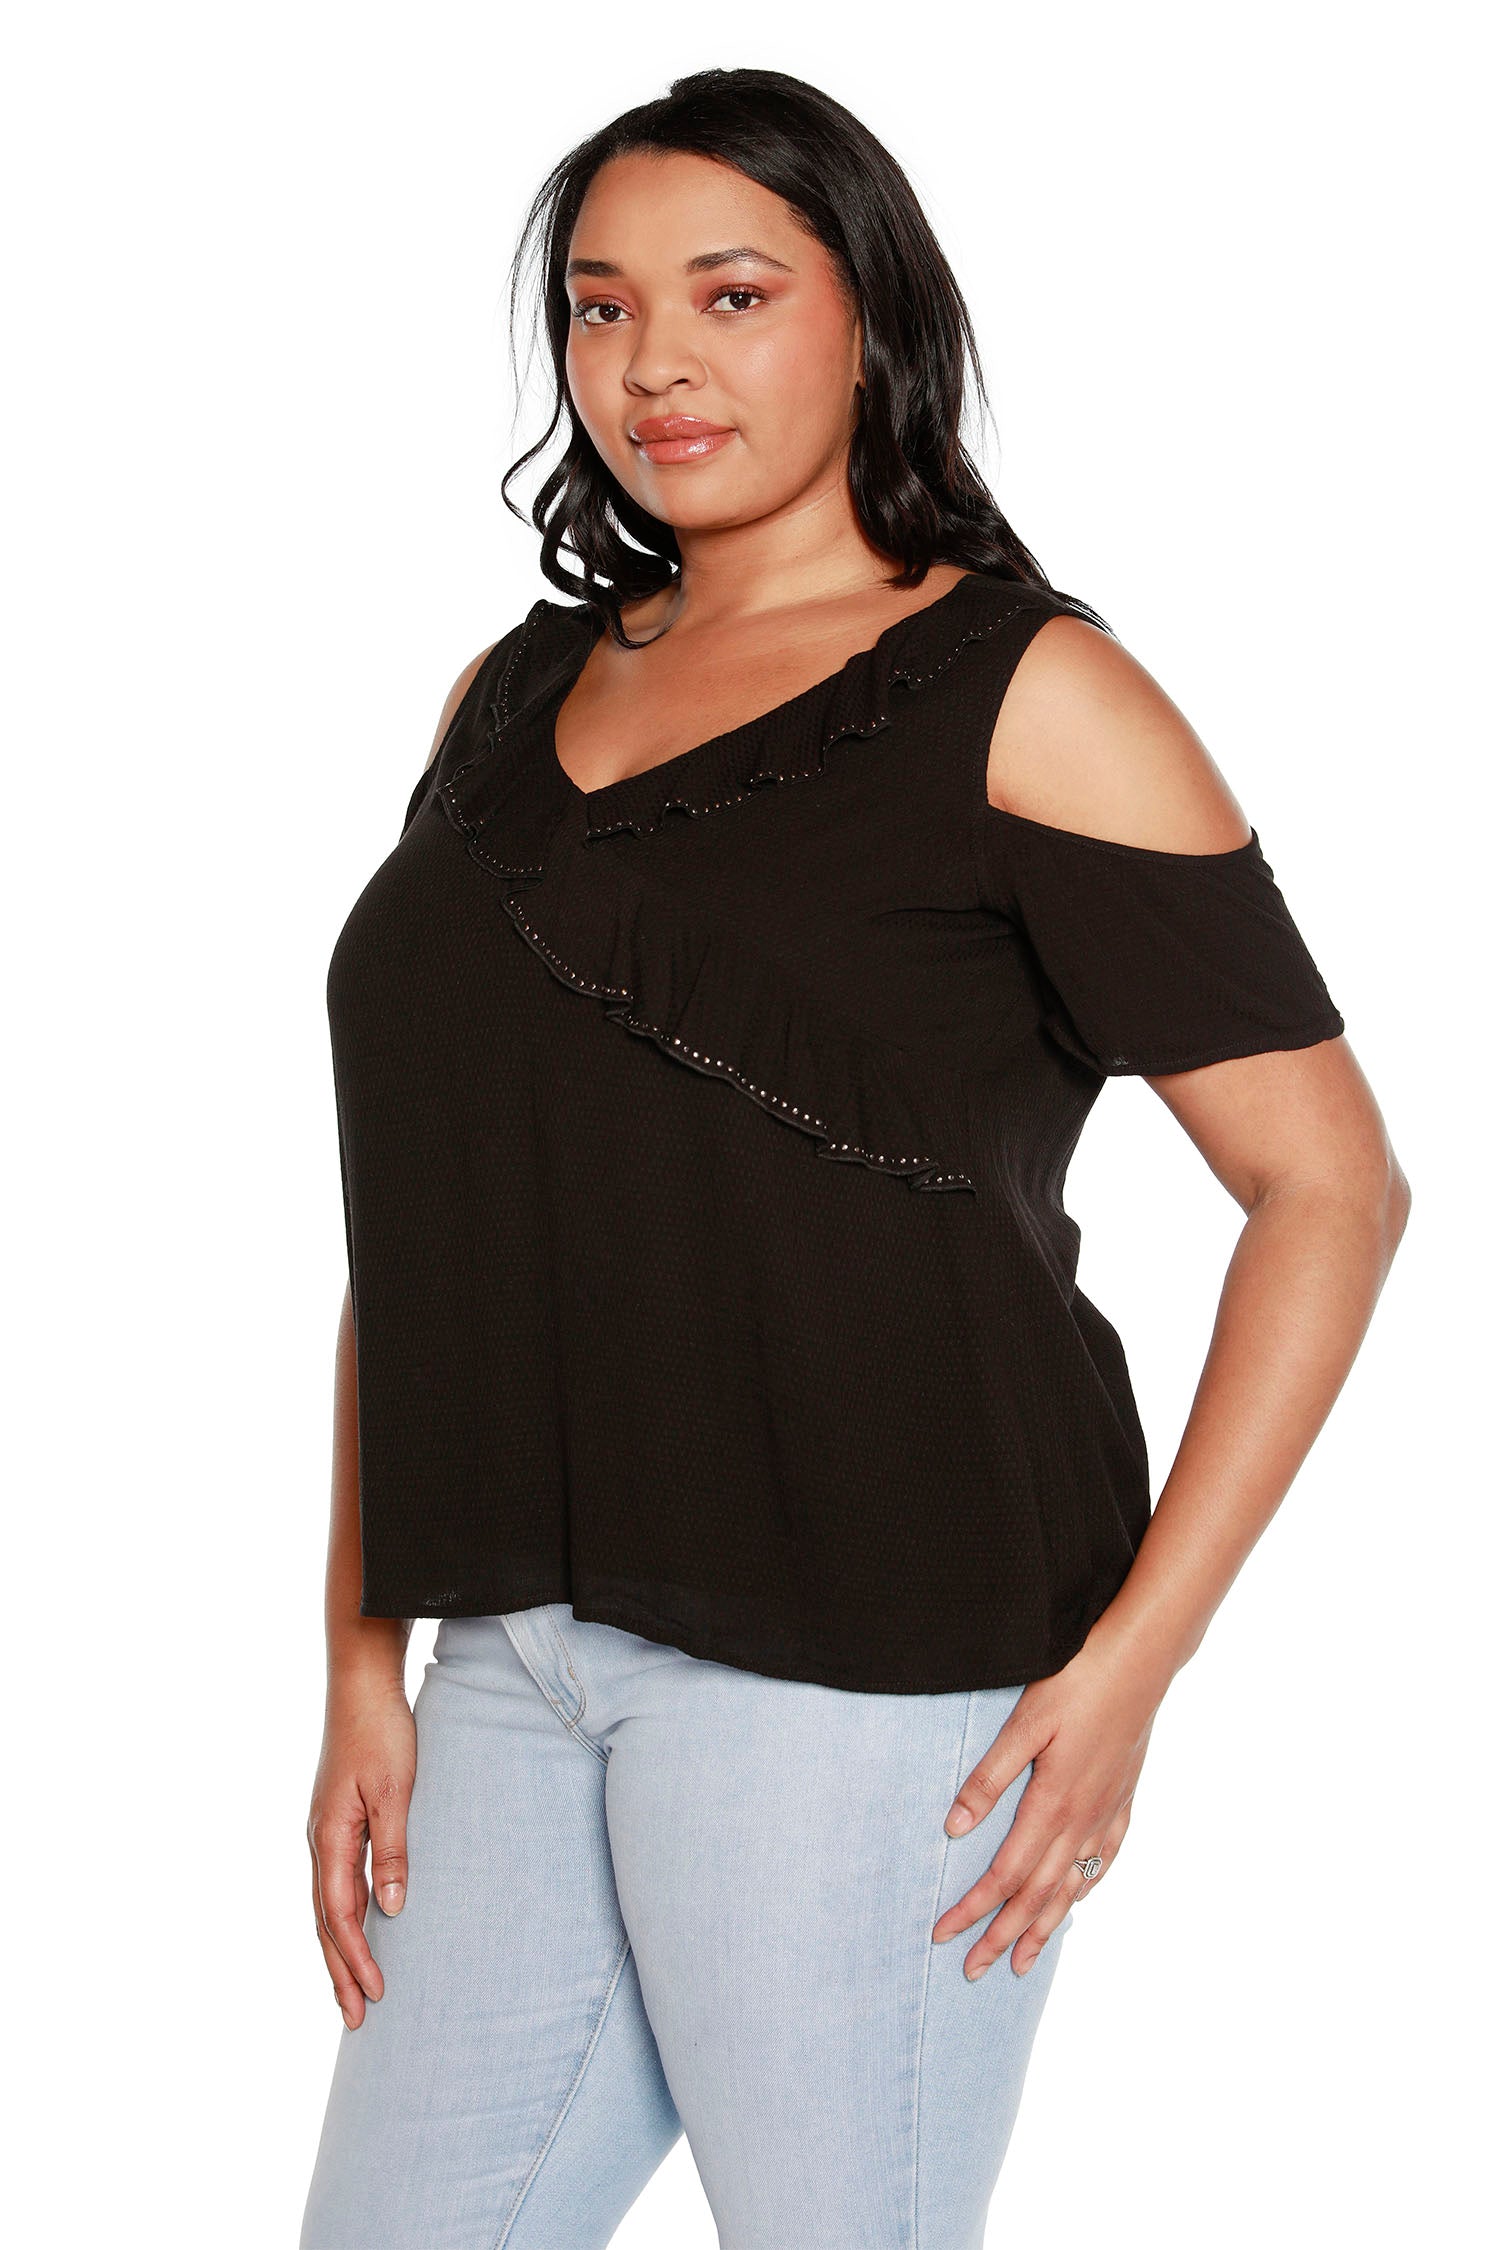 Women’s Cold Shoulder Top with Ruffles and Nail Heads | Curvy